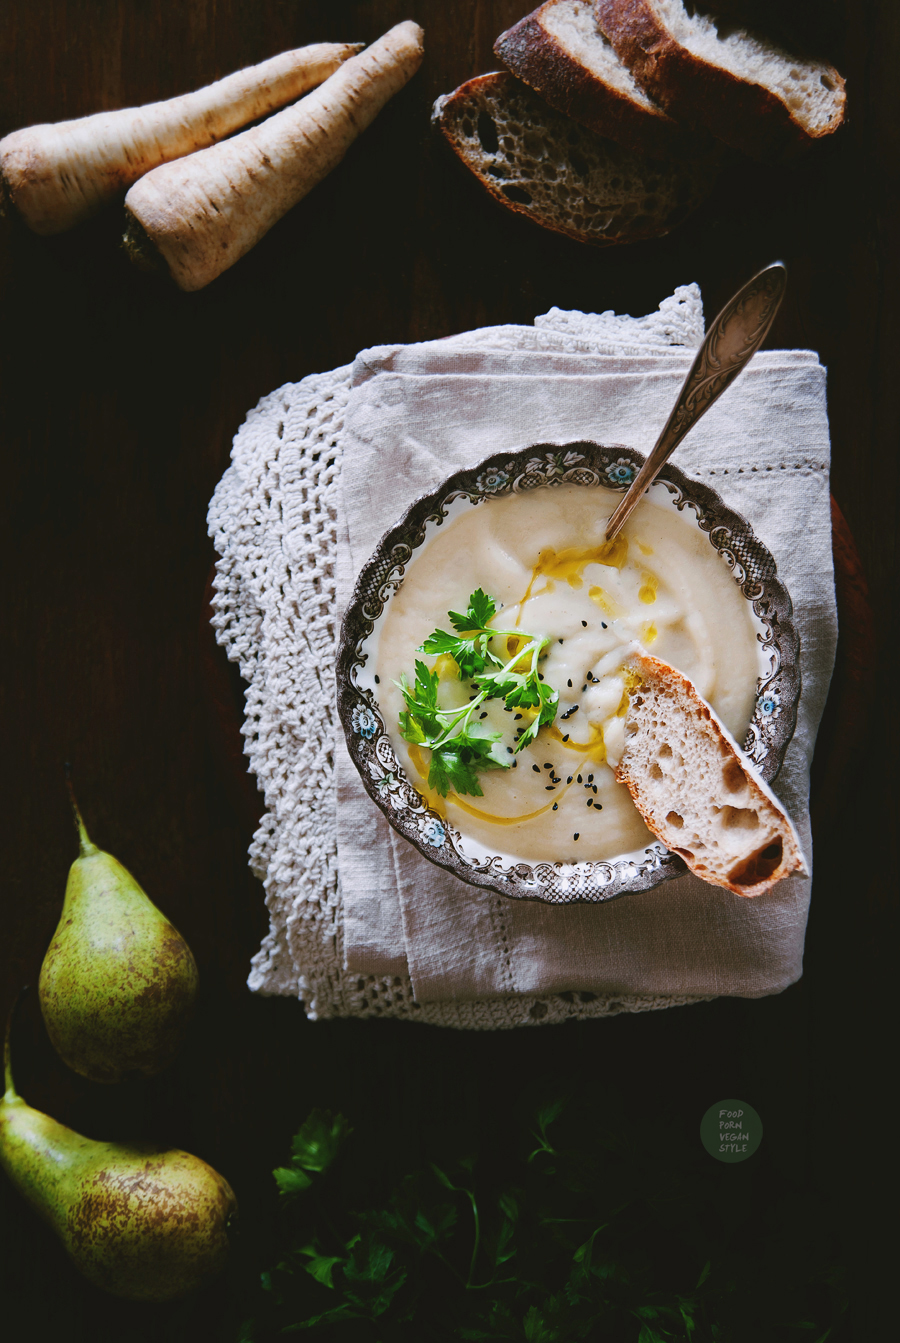 Pear and parsnip soup with tarragon